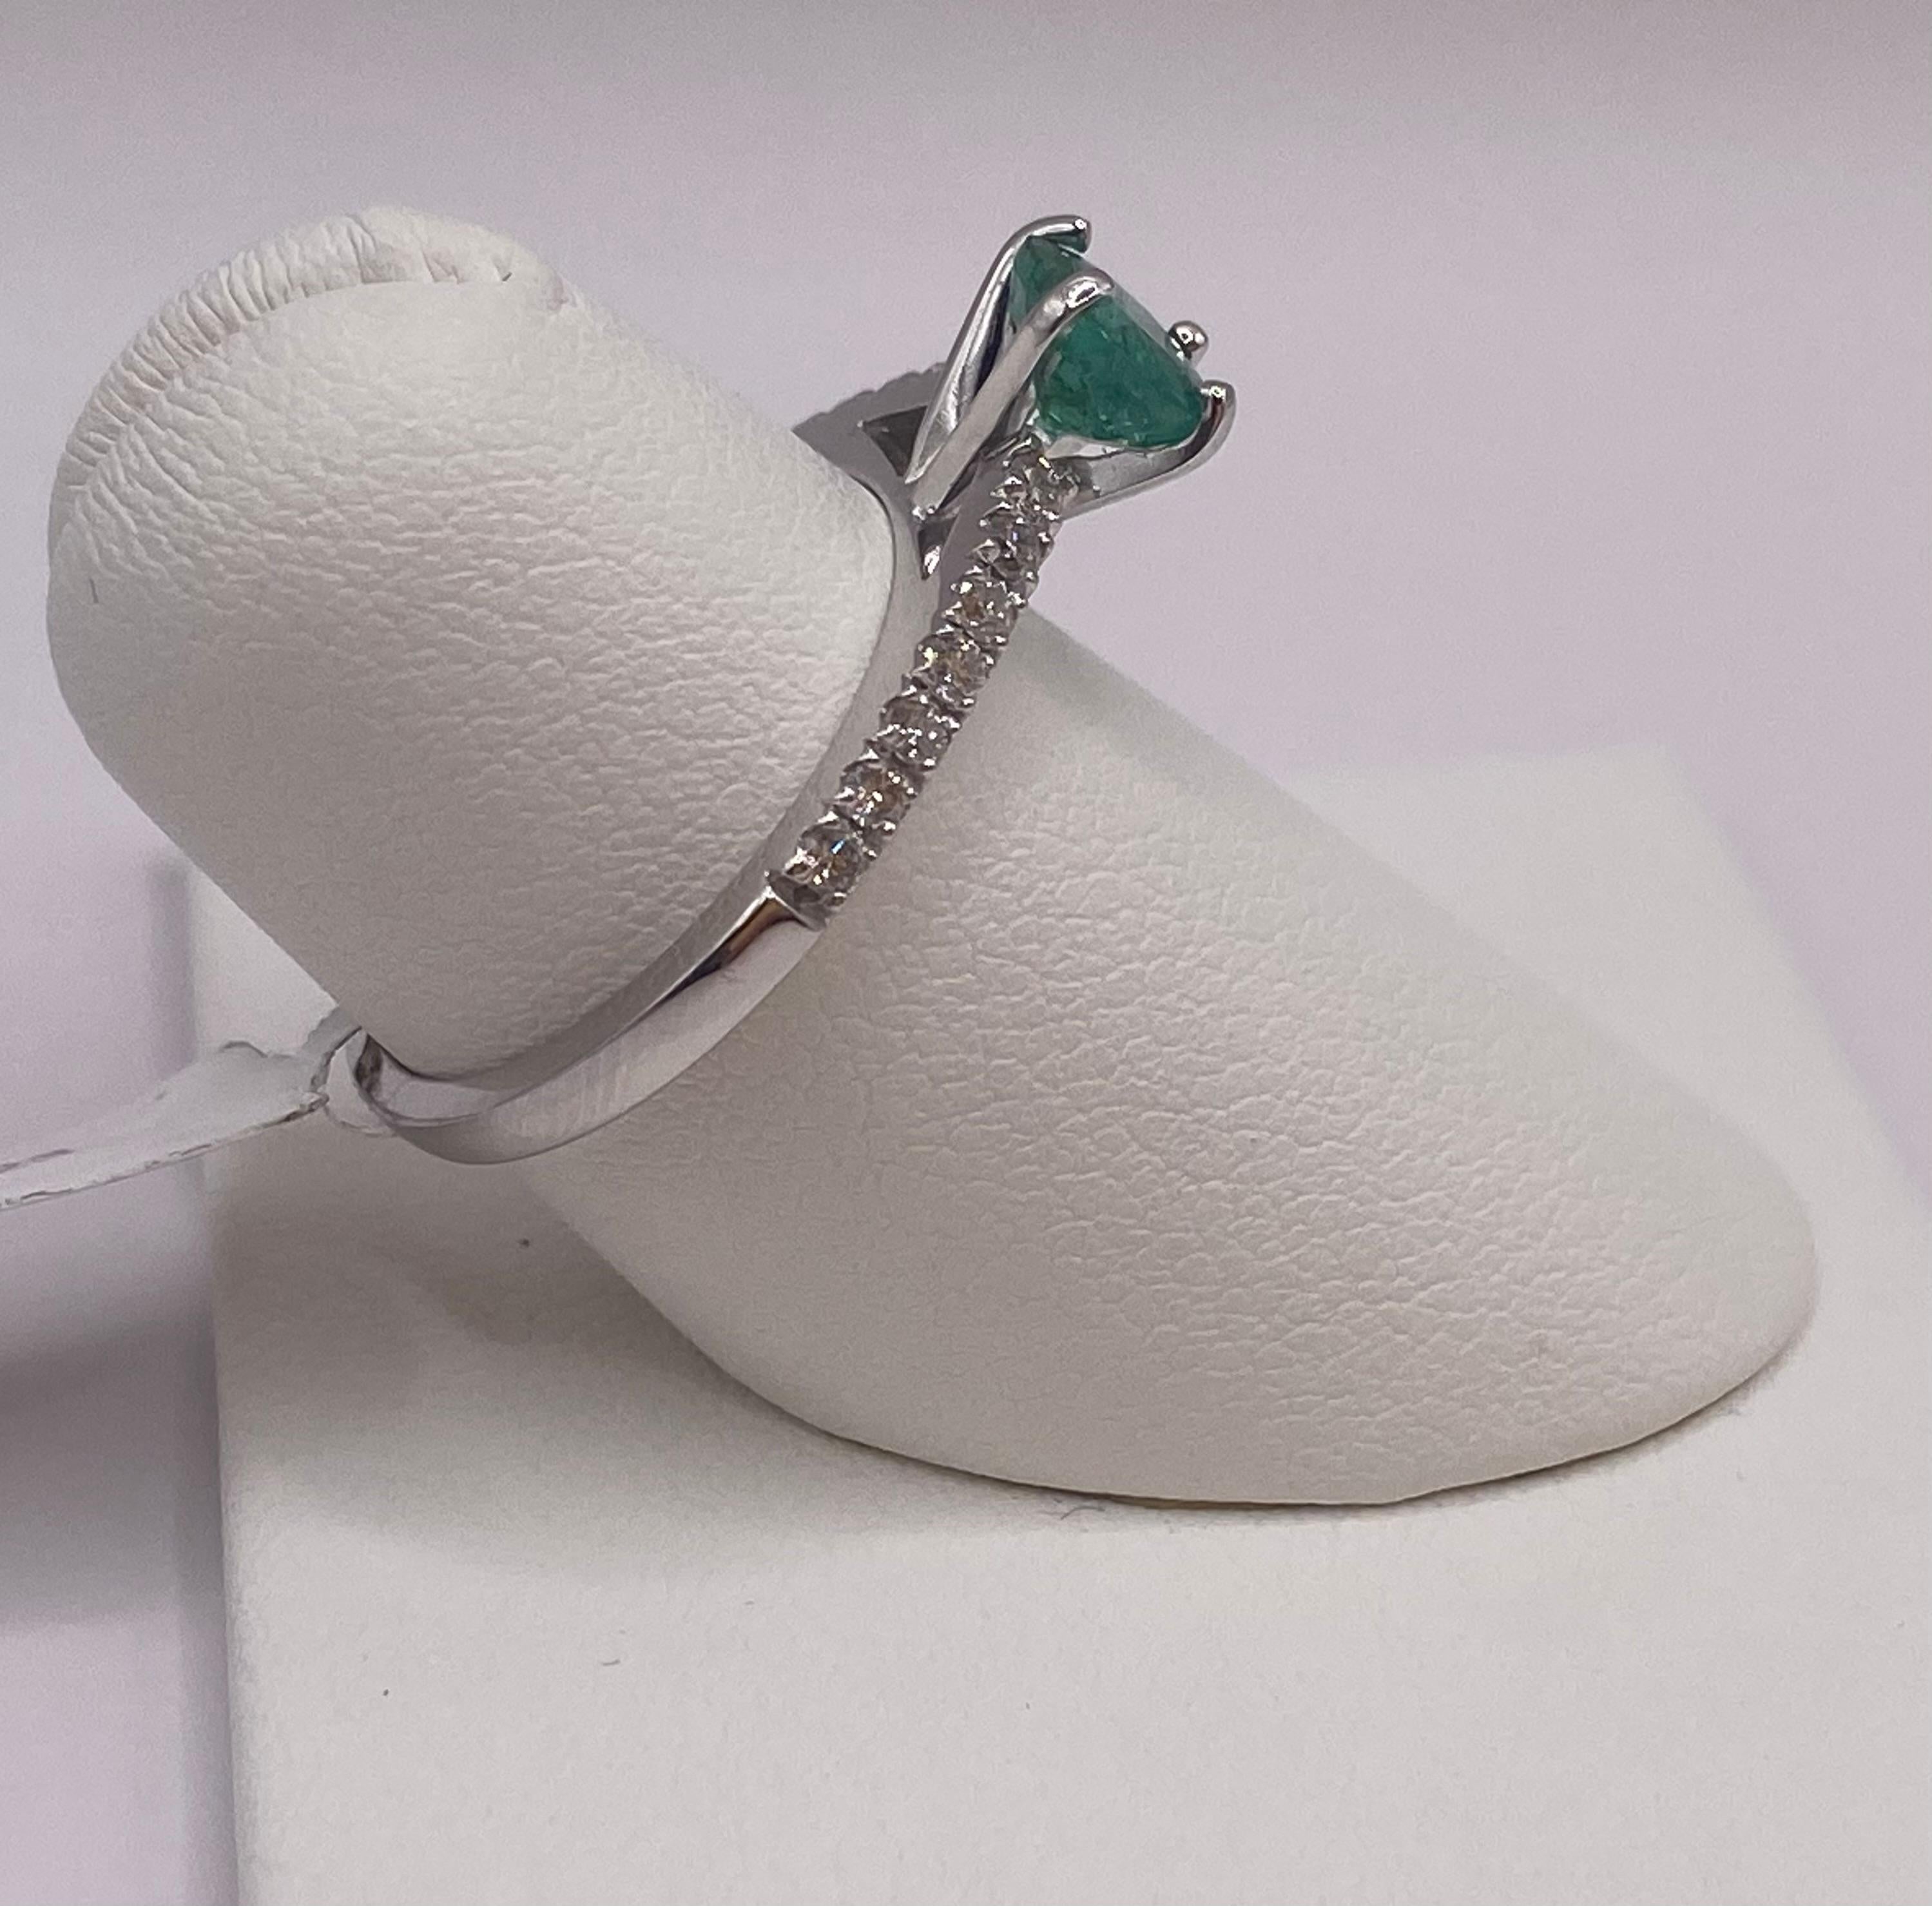 Metal: 14KT White Gold
Ring Size: 6.50
(Ring is size 6.5, but is sizable upon request)

Number of Round Emeralds: 1
Carat Weight: 0.83ctw
Stone Size: 6.0mm

Number of Round Diamonds: 14
Carat Weight: 0.23ctw